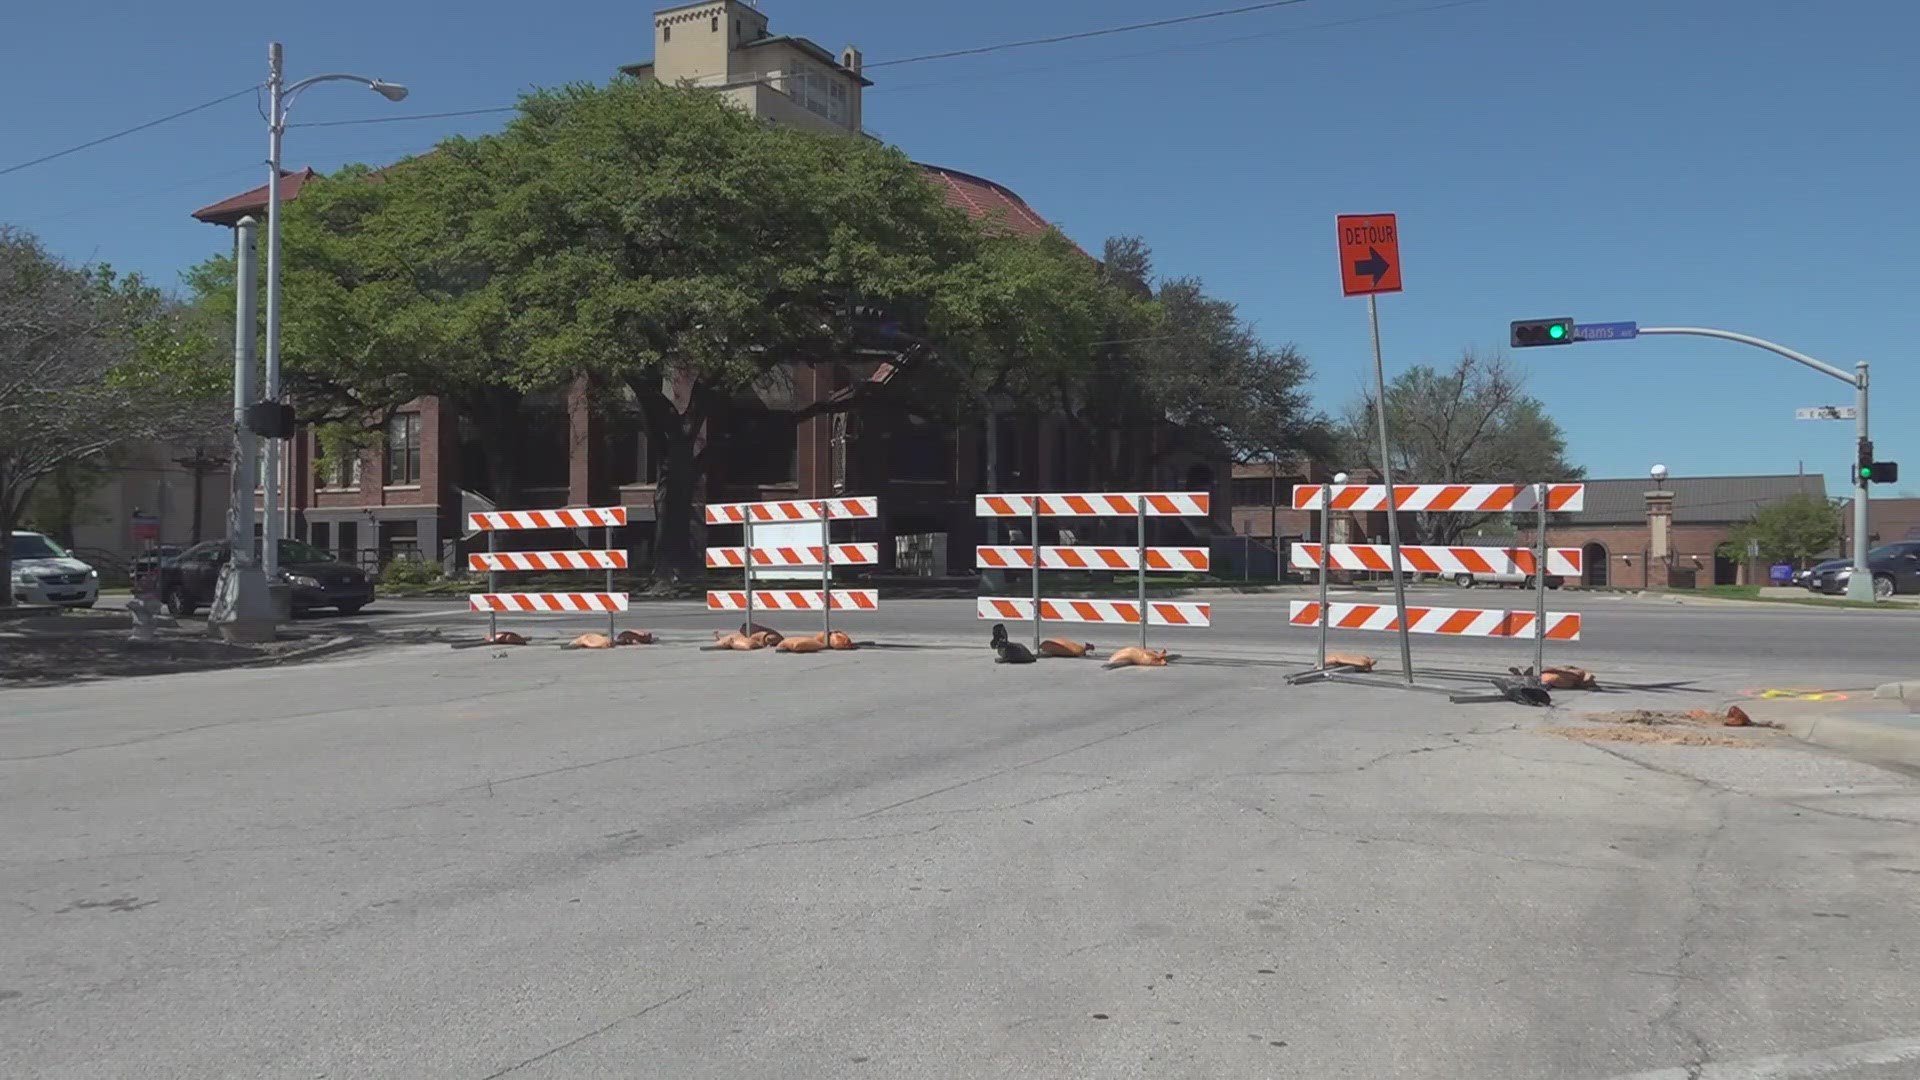 Construction projects have closed down multiple streets in the area, causing impacts to local businesses.